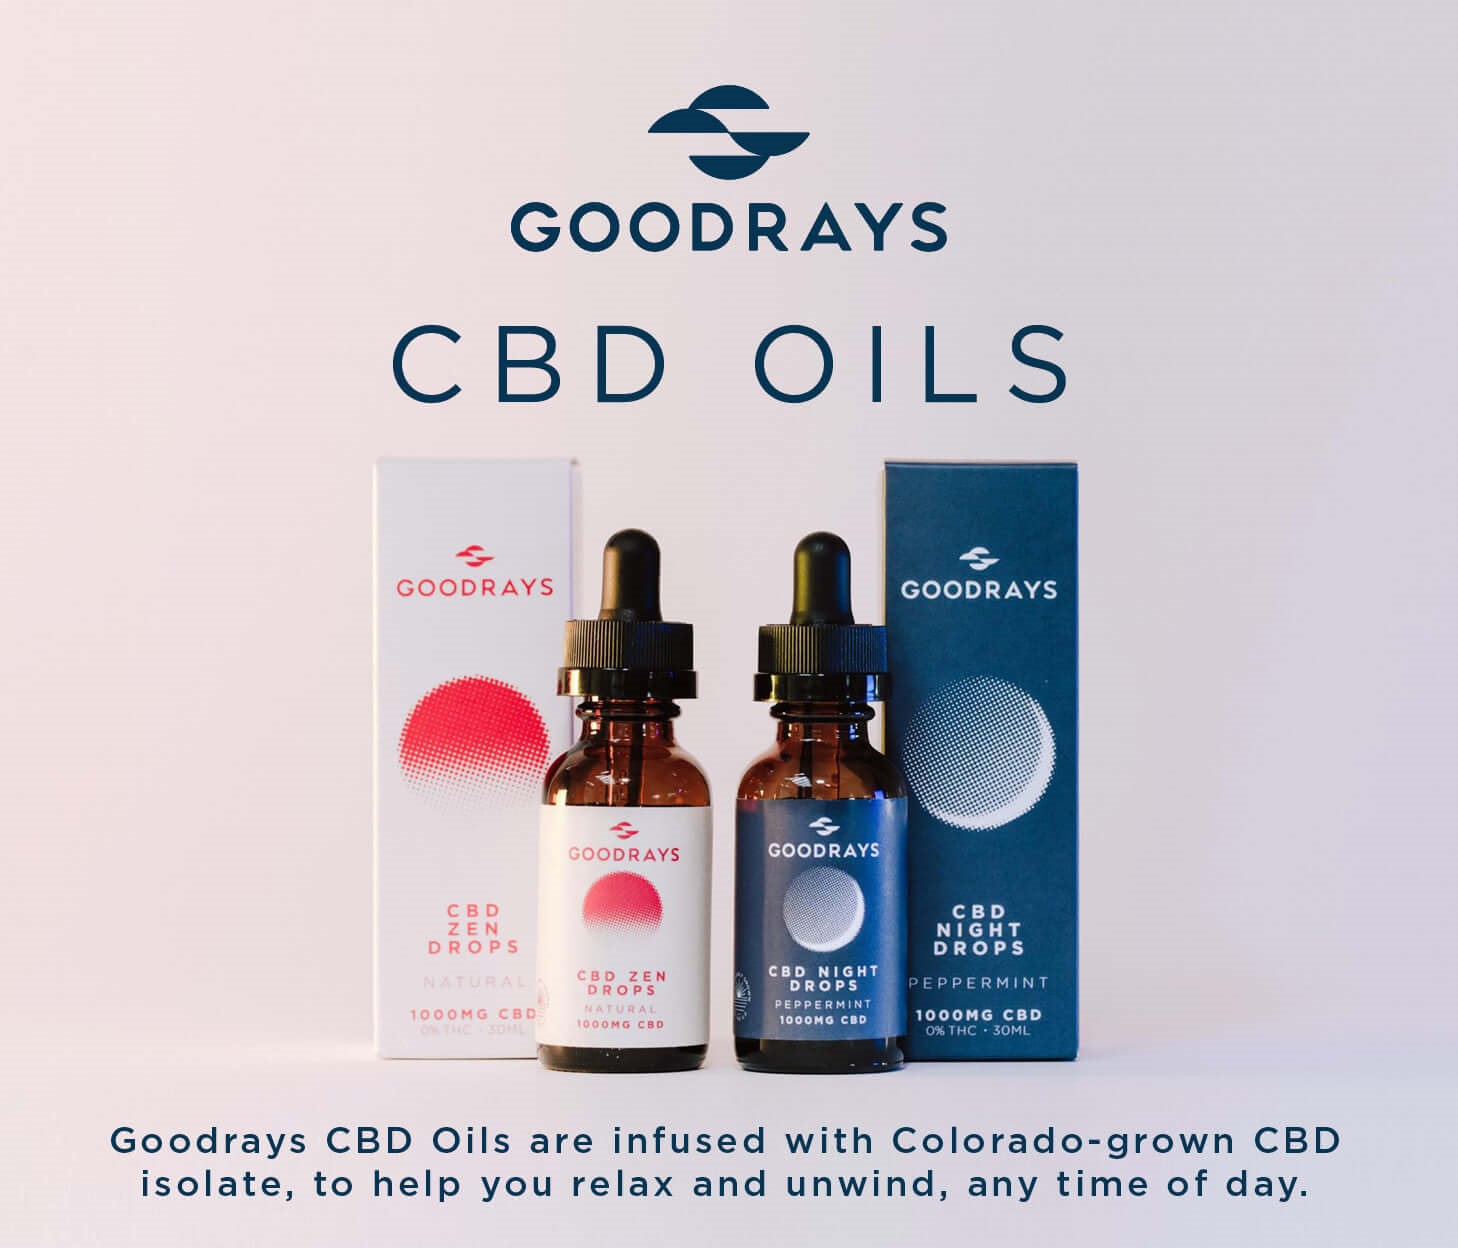 All About Goodrays CBD Oils and Its Health Benefits.